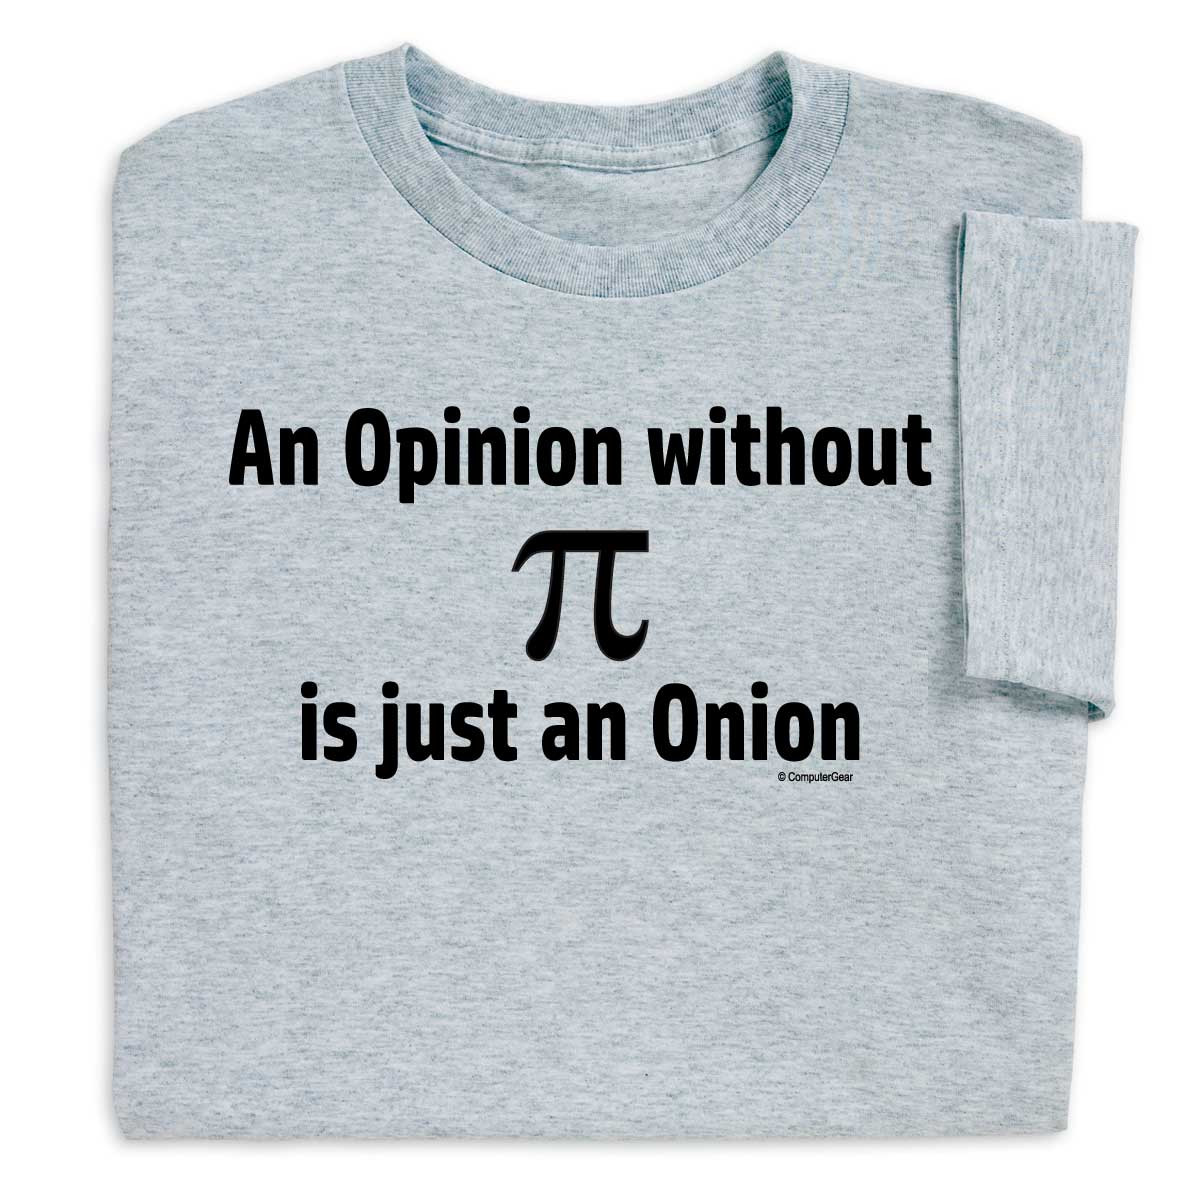 Pi Day Gifts
 Geek out with Opinion Without Pi is Just an ion Pi T